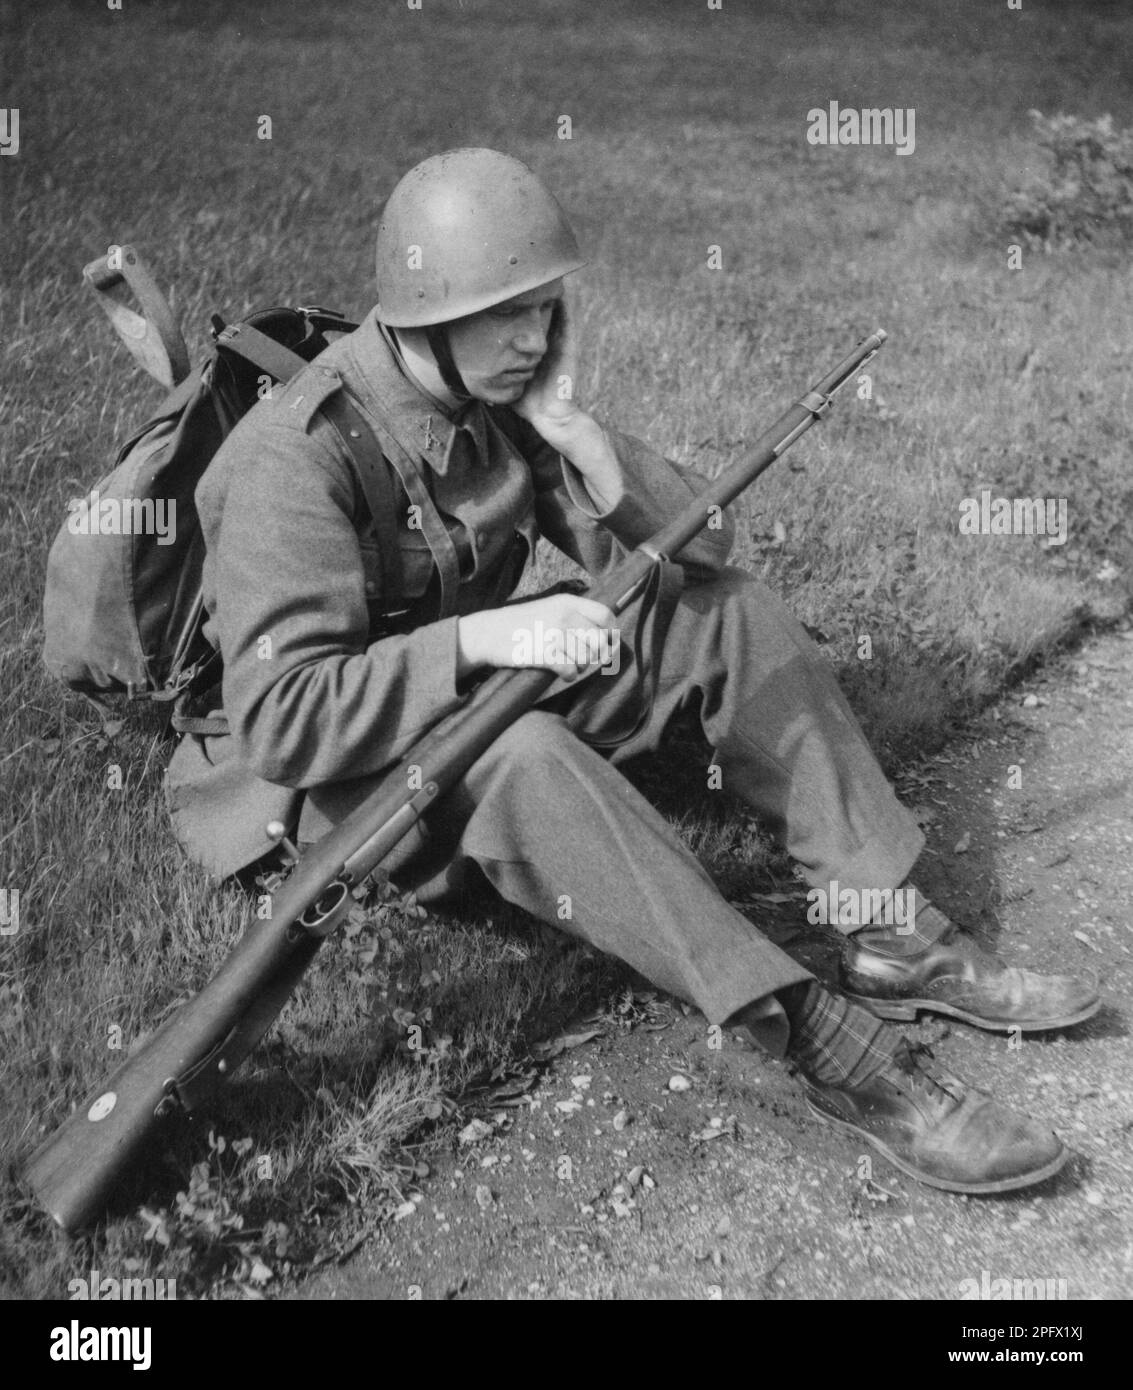 Soldier in the 1940s. A man in his uniform, rifle and parcel looks tired when he sits on the ground, resting his head on his arm. Sweden 1942 Stock Photo